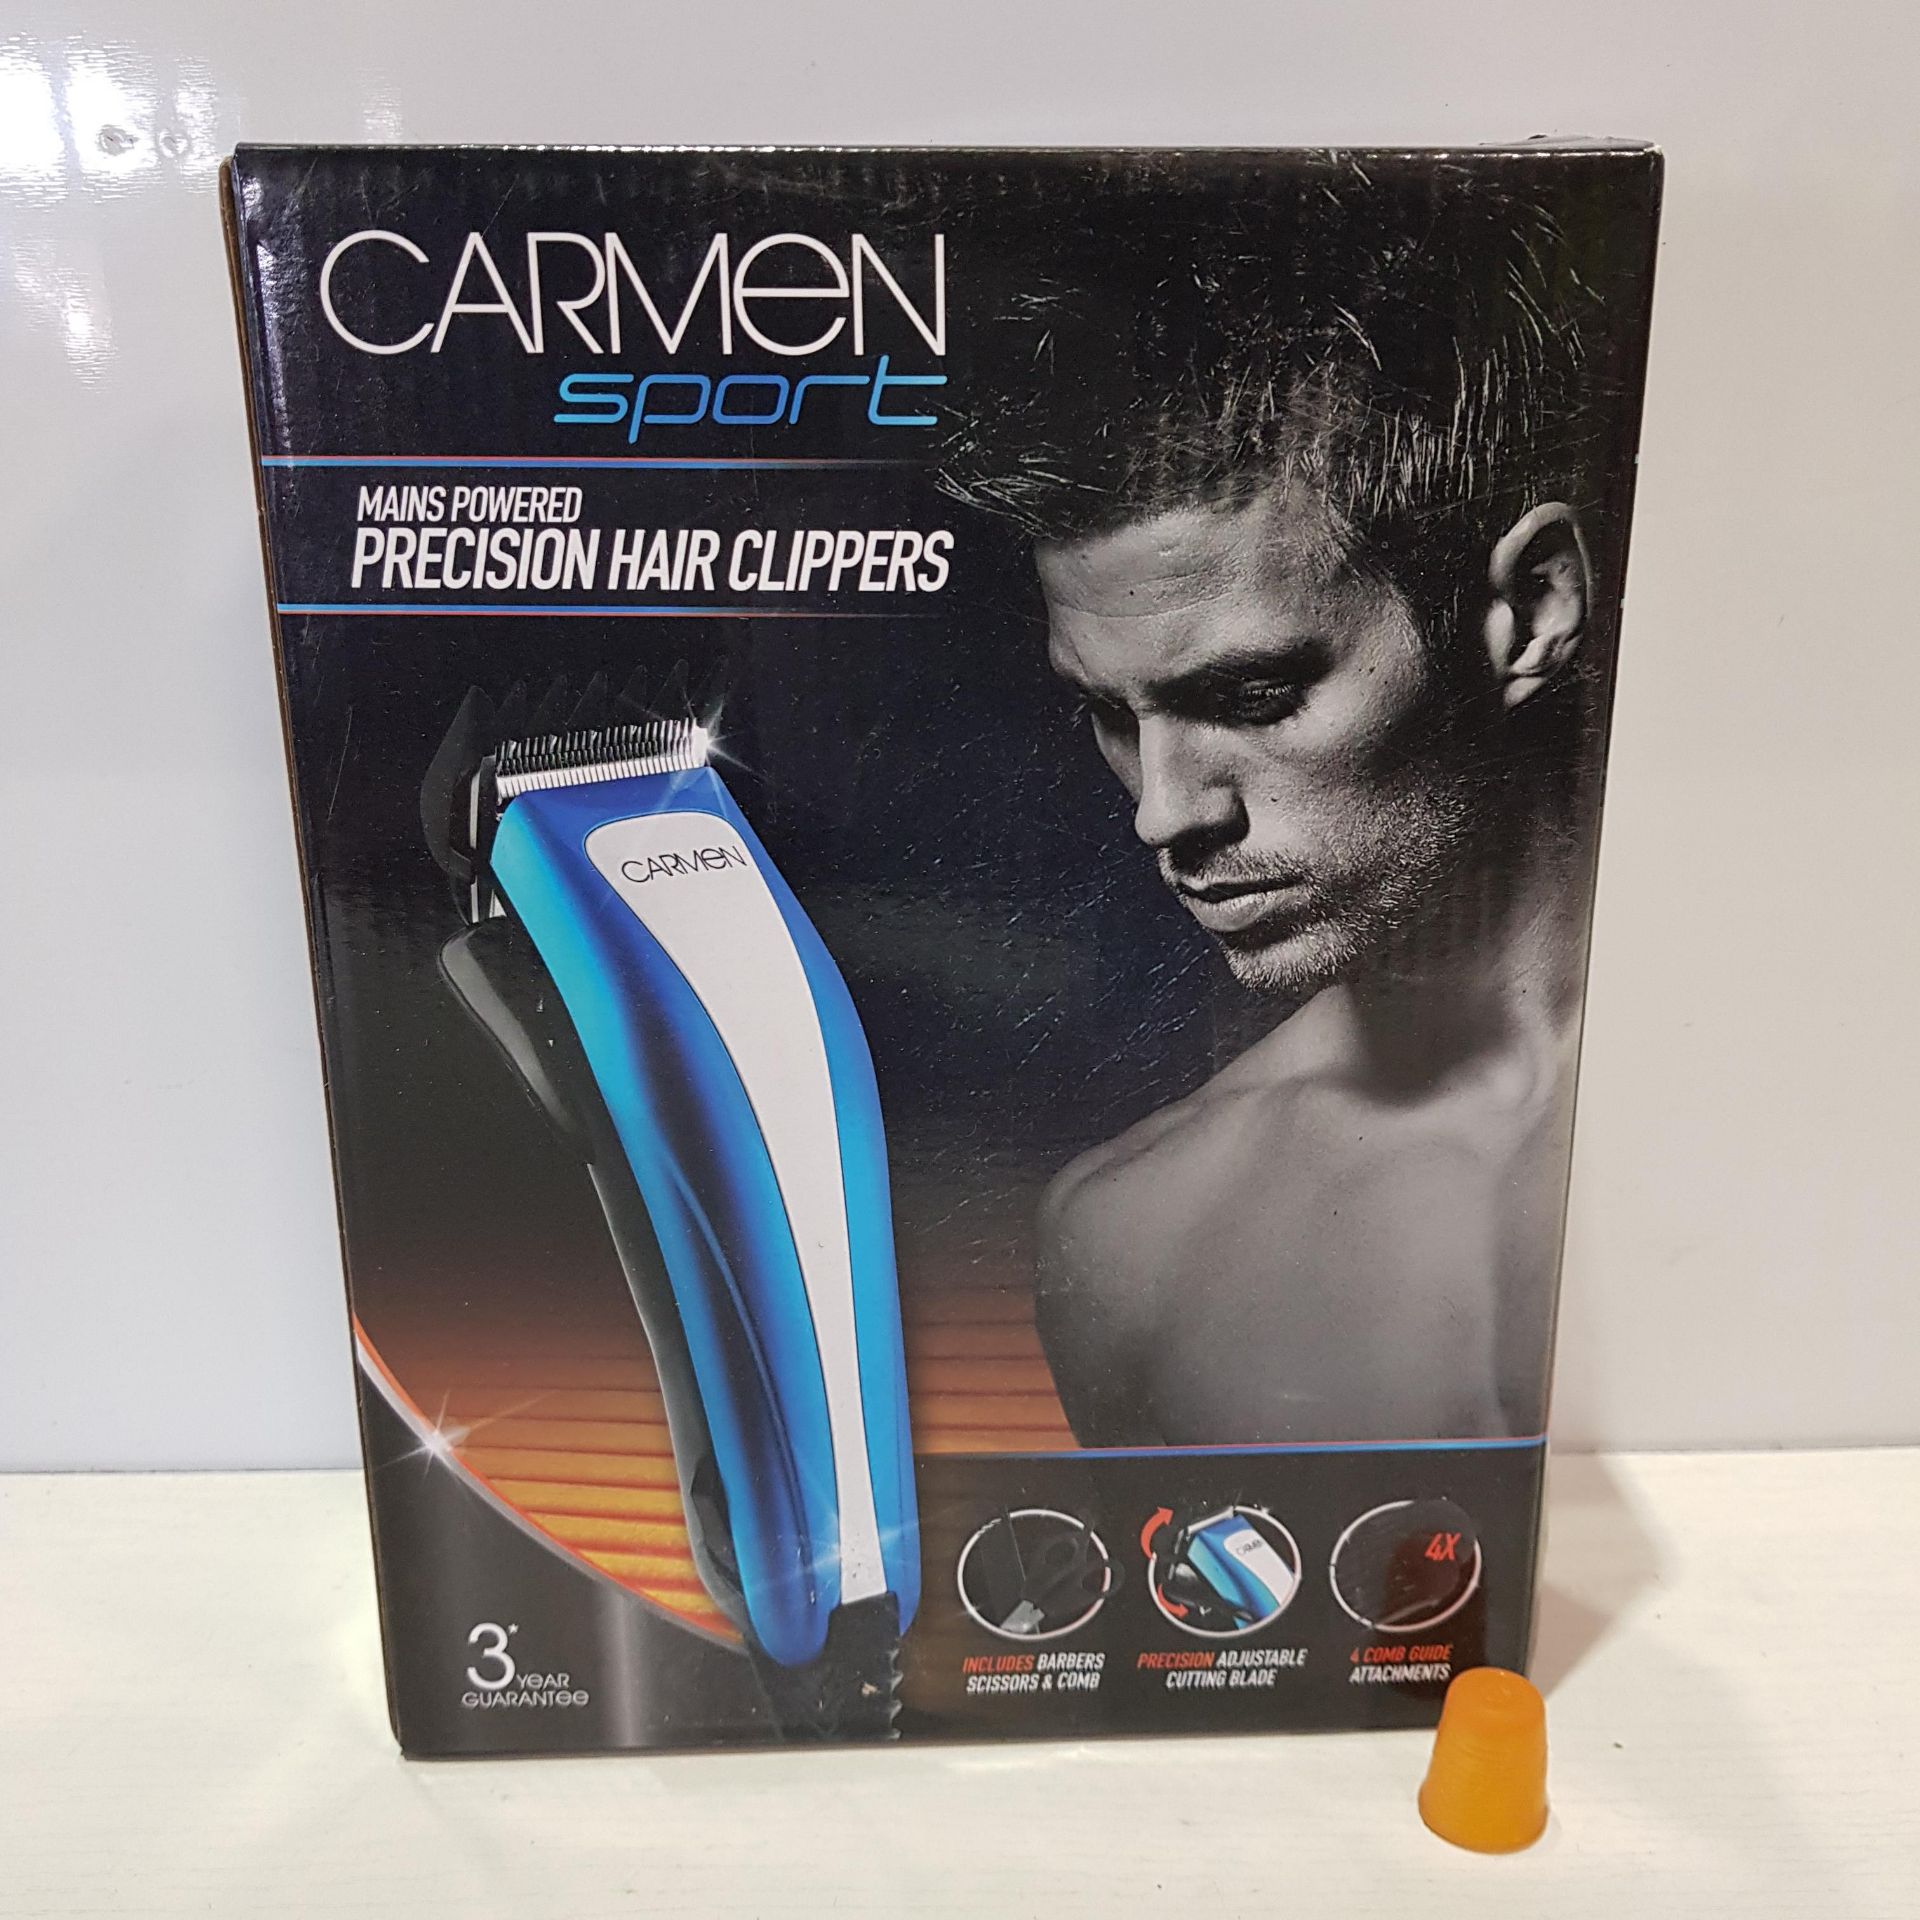 14 X CARMEN SPORT MAINS POWERED PRECISION HAIR CLIPPERS WITH BARBERS SCISSORS AND COMB AND 4 COMB